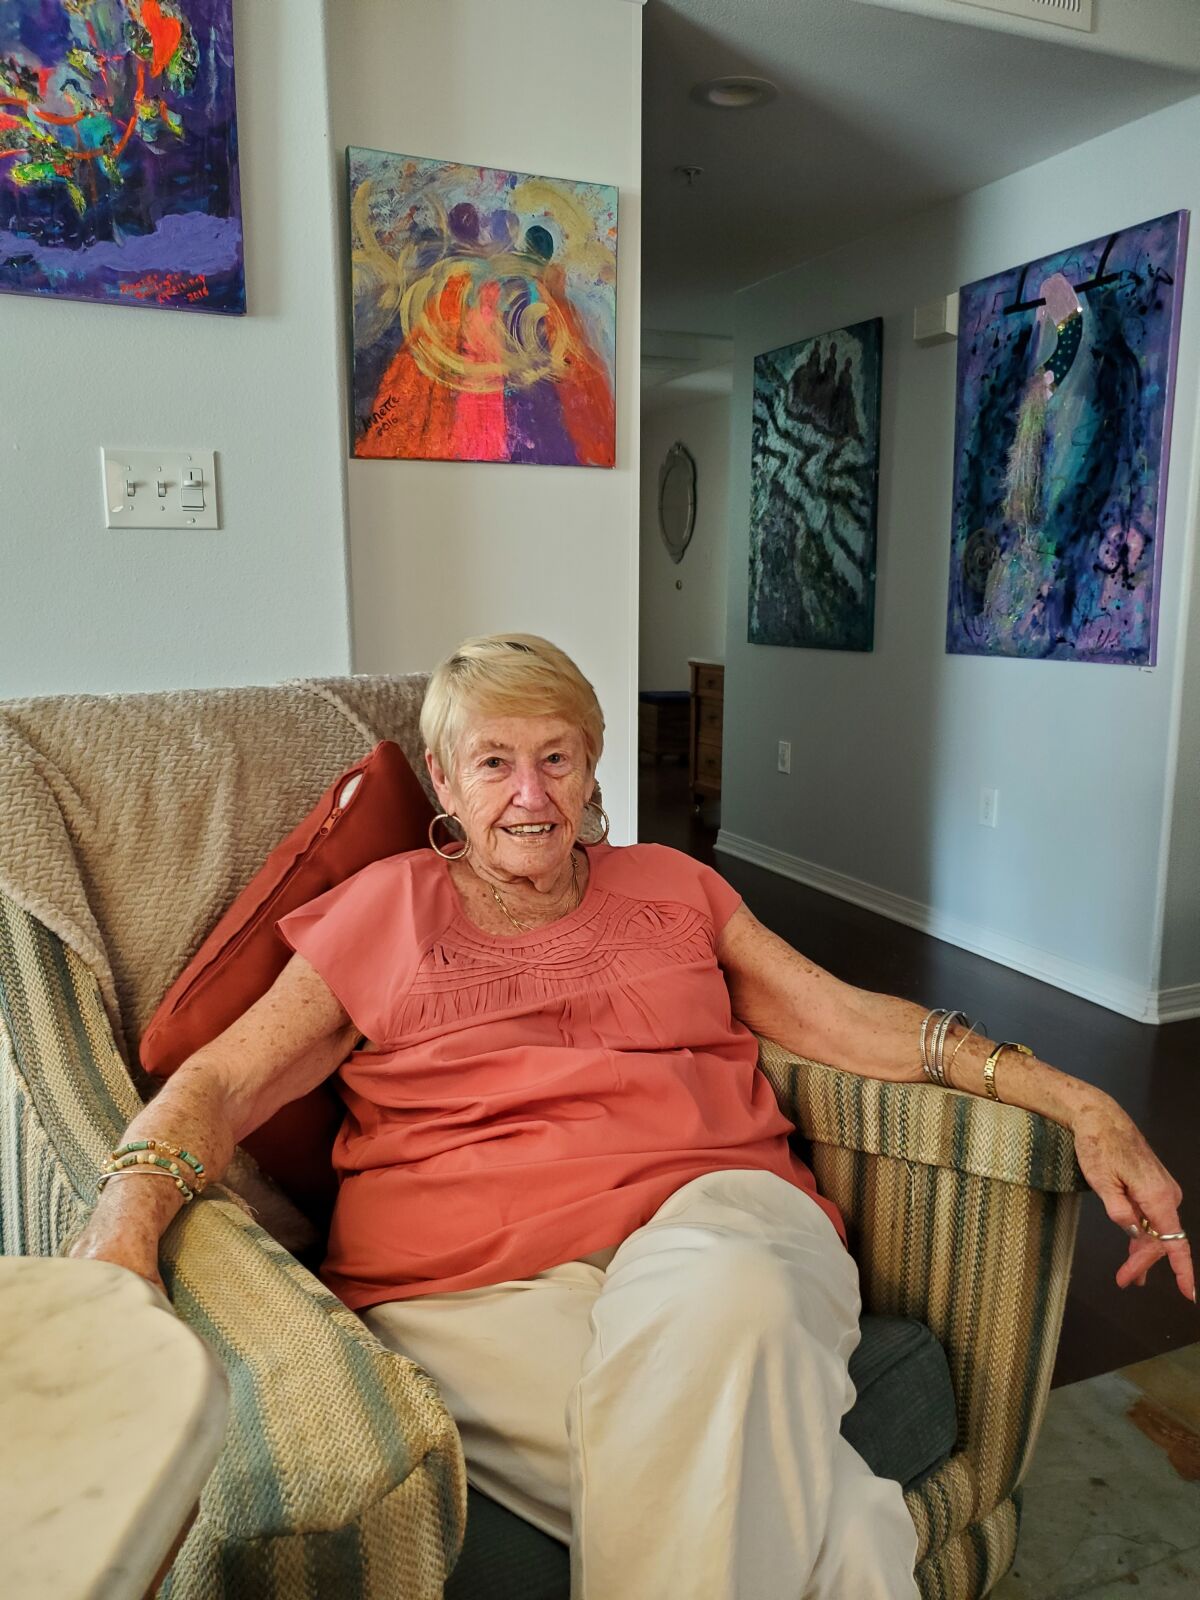 La Jolla resident and ovarian cancer survivor Annette McElhiney is surrounded by paintings she created.